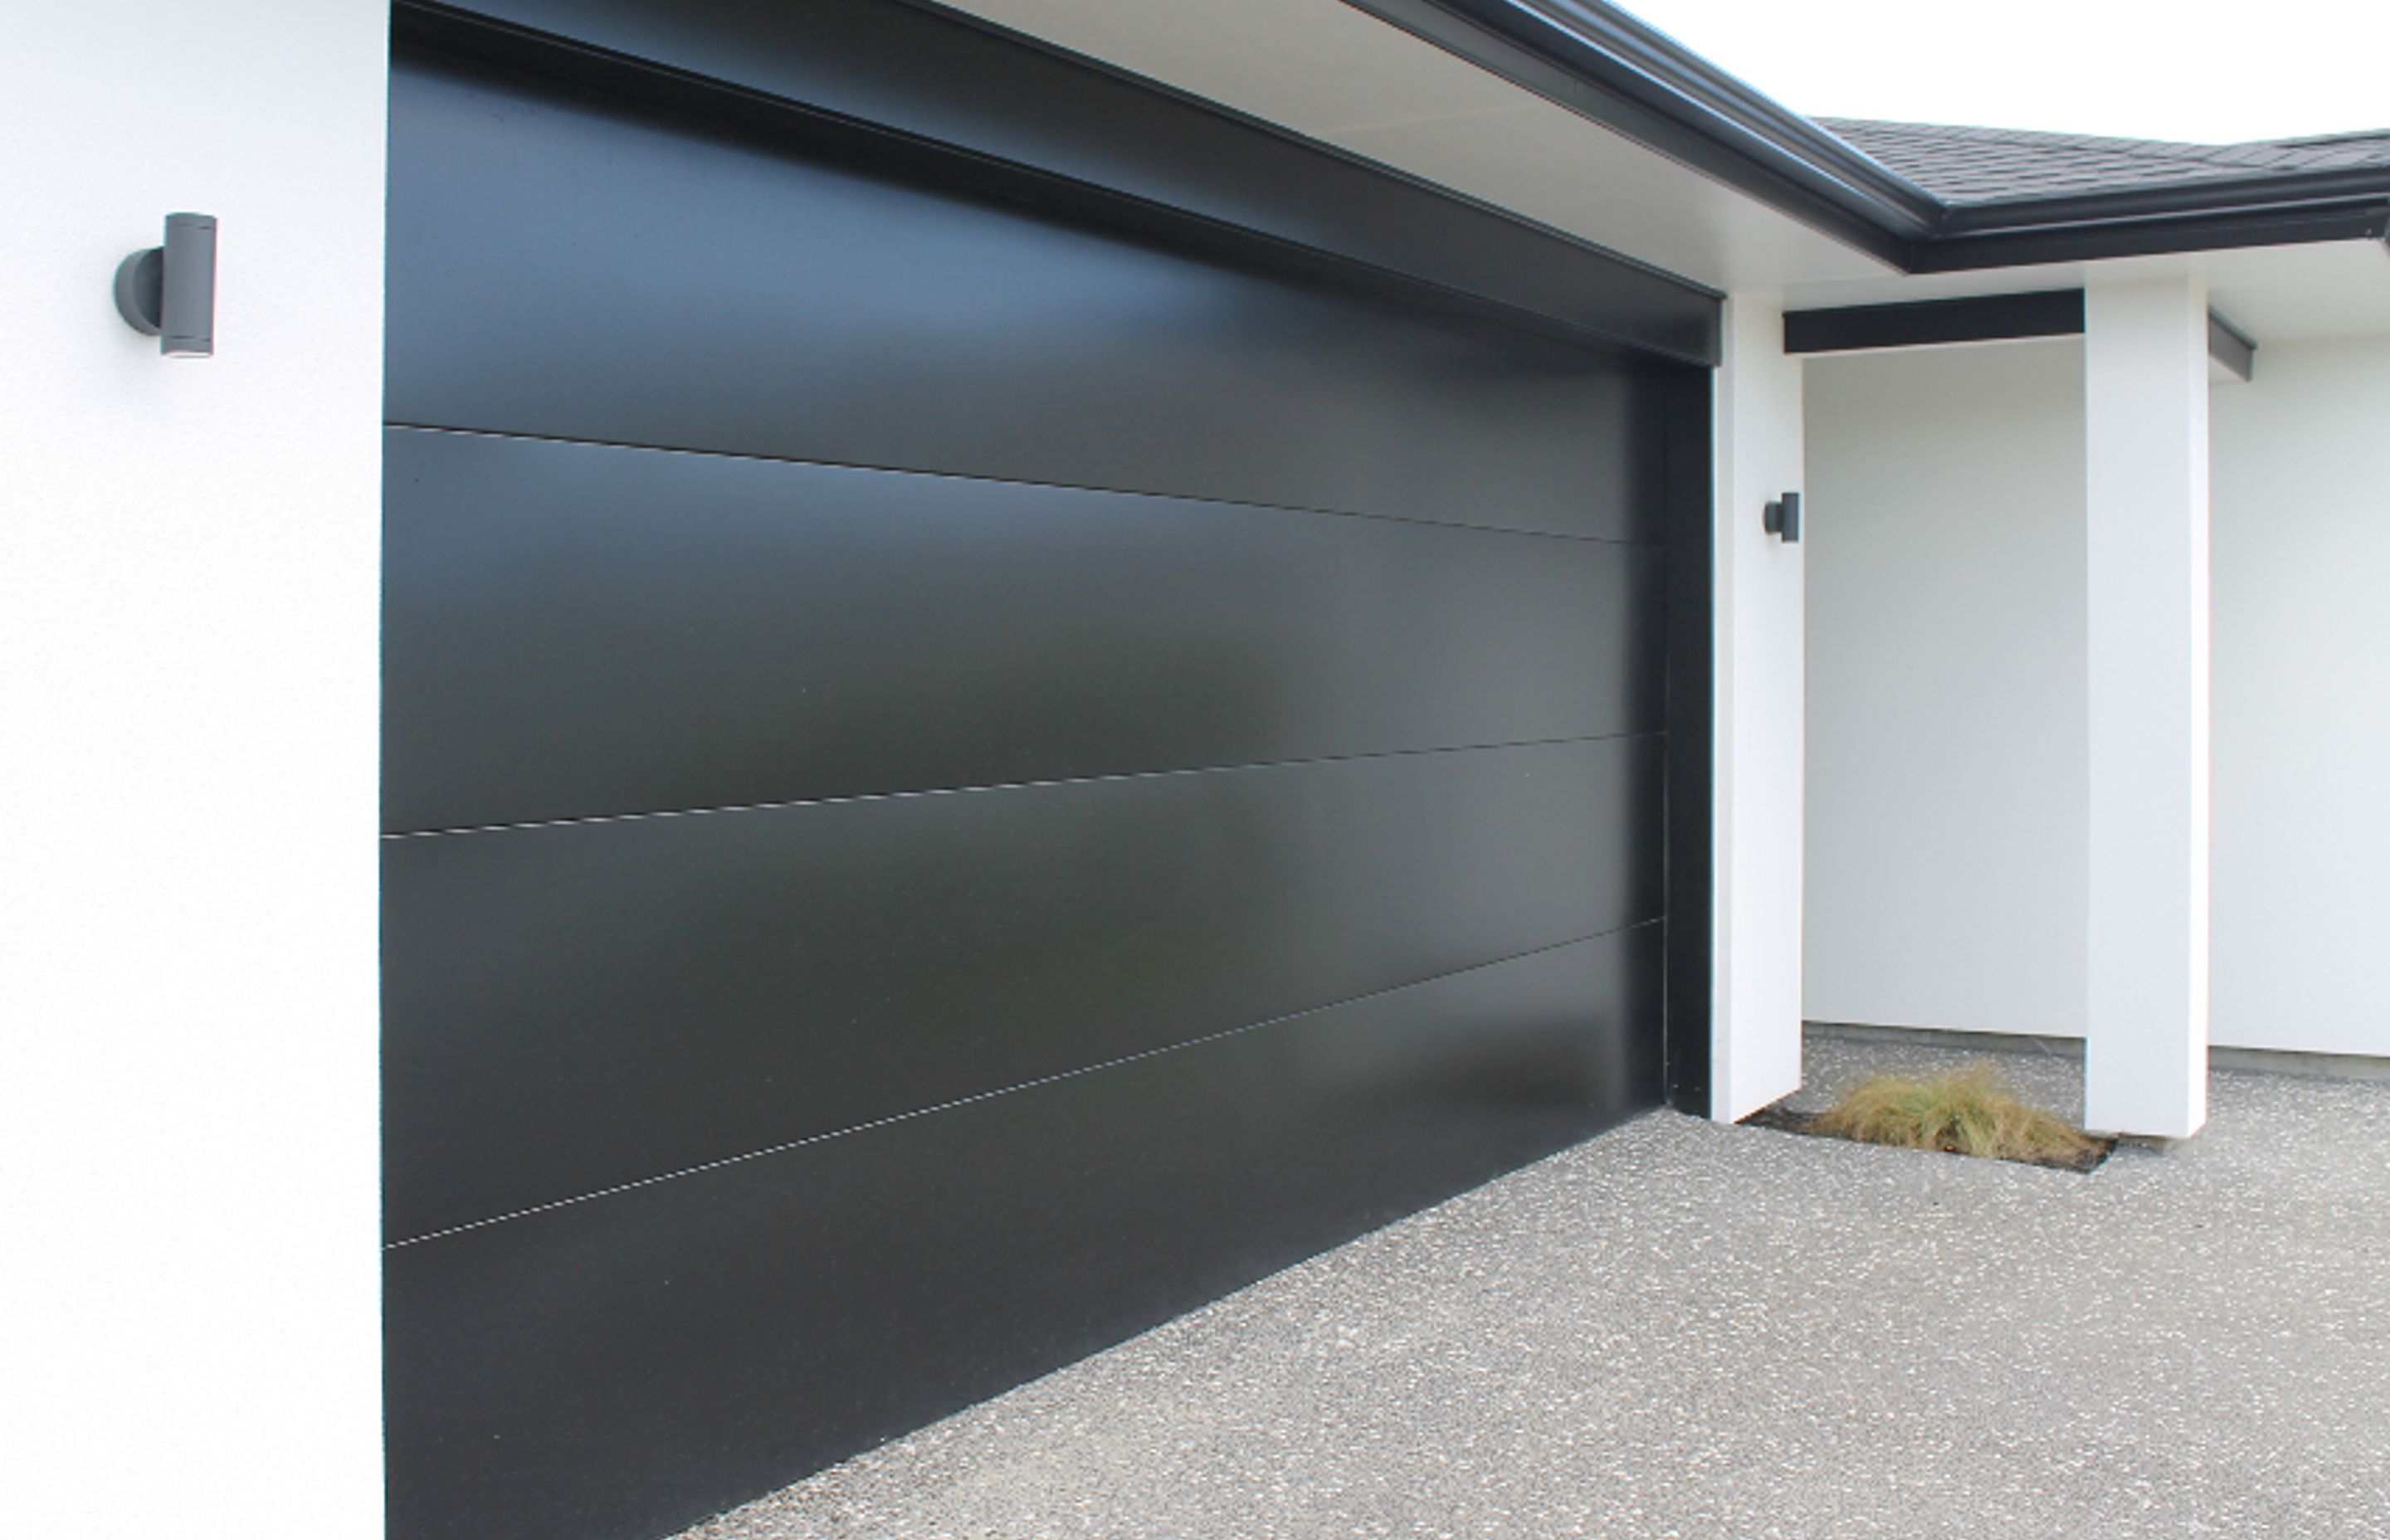 Dominator Sierra is a visually crisp door choice with fine horizontal lines that complement most modern cladding designs and is available in an array of powder coated and zincalume finishes.